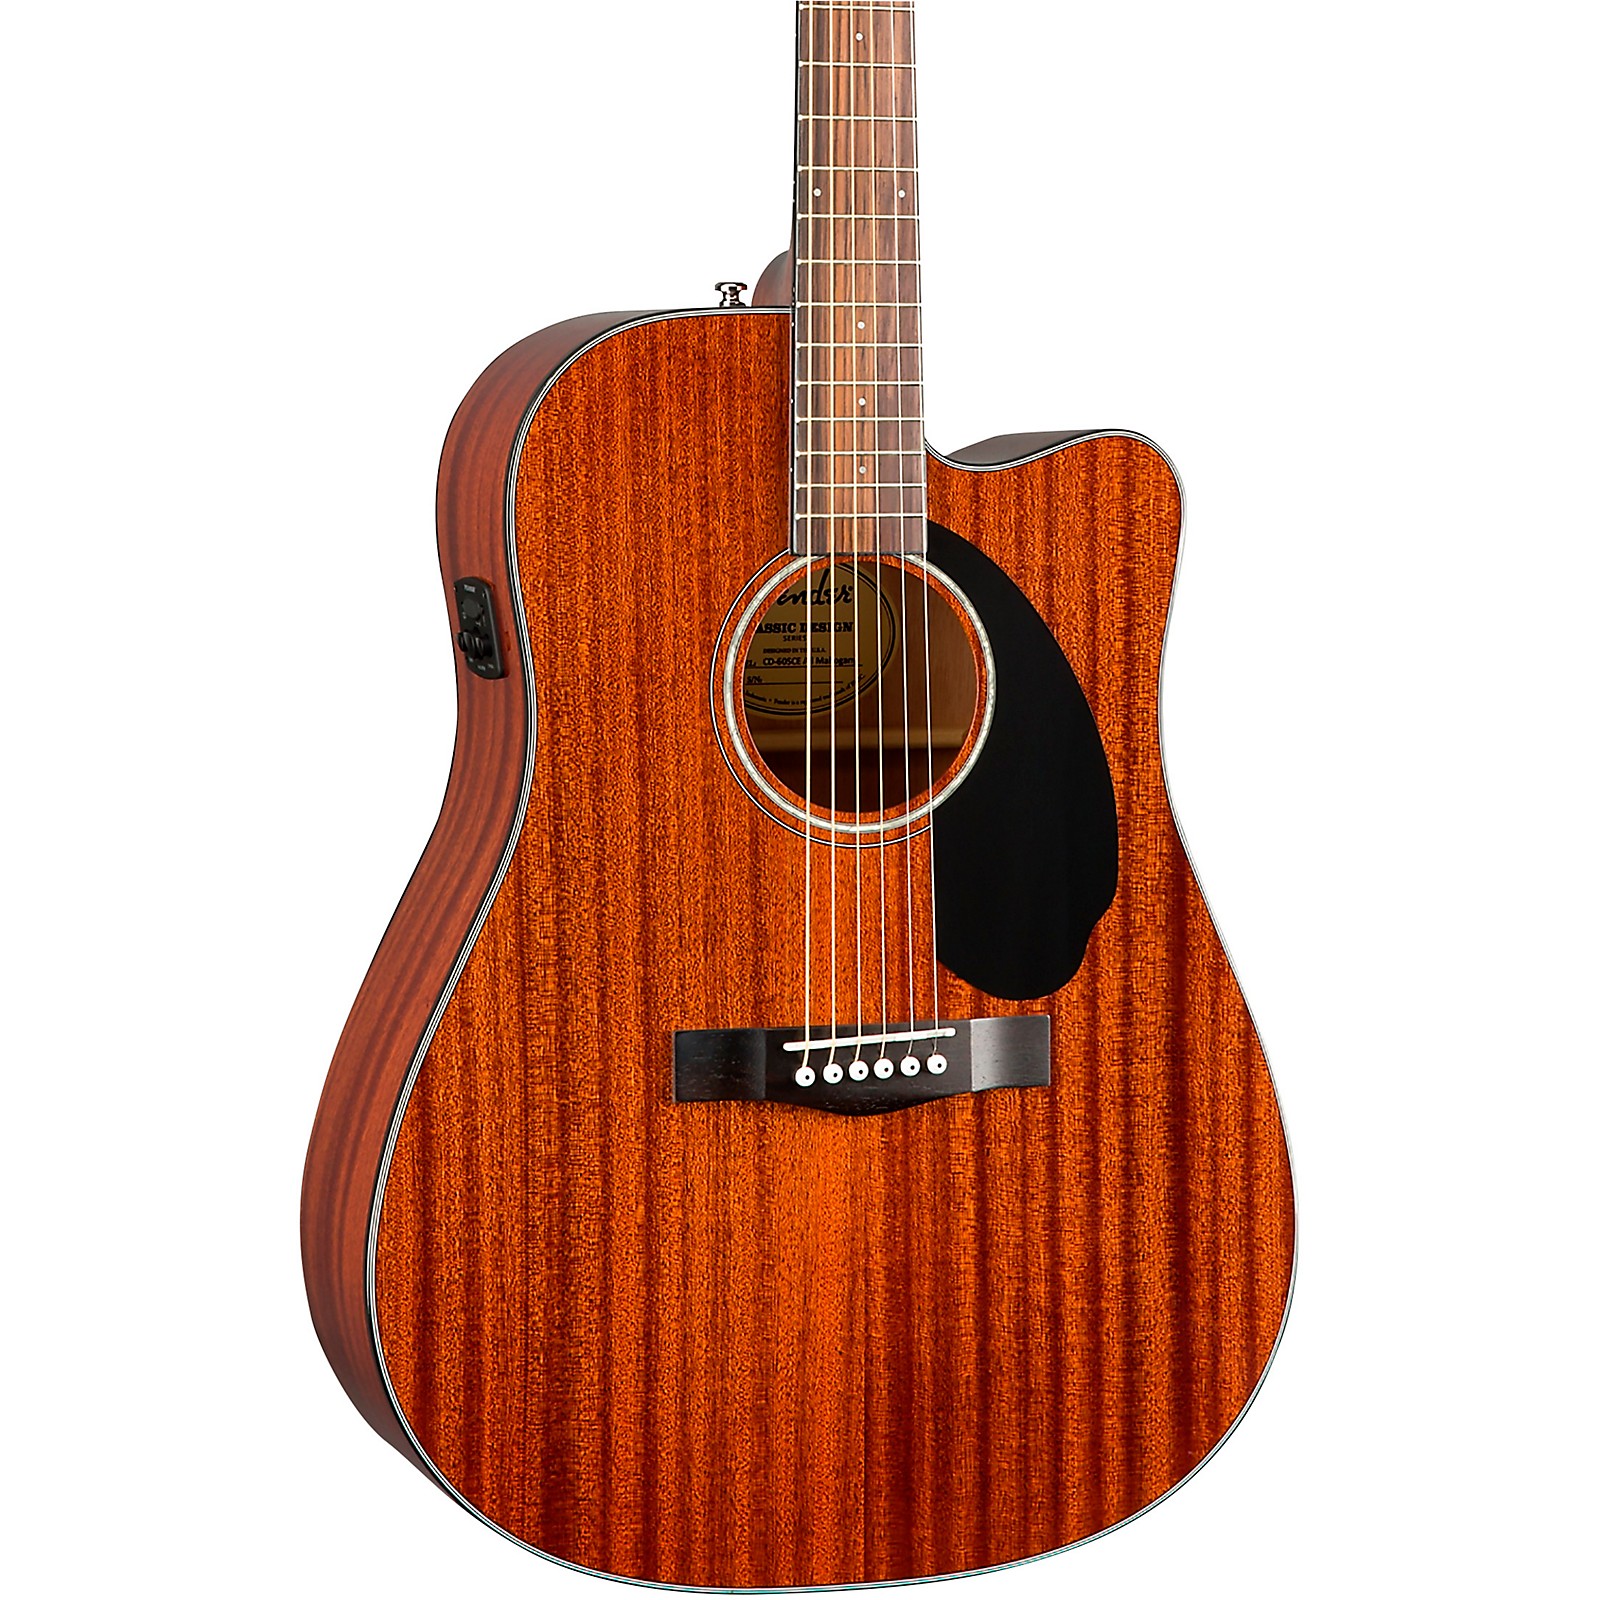 Fender CD-60SCE Dreadnought All-Mahogany Acoustic-Electric Guitar Natural